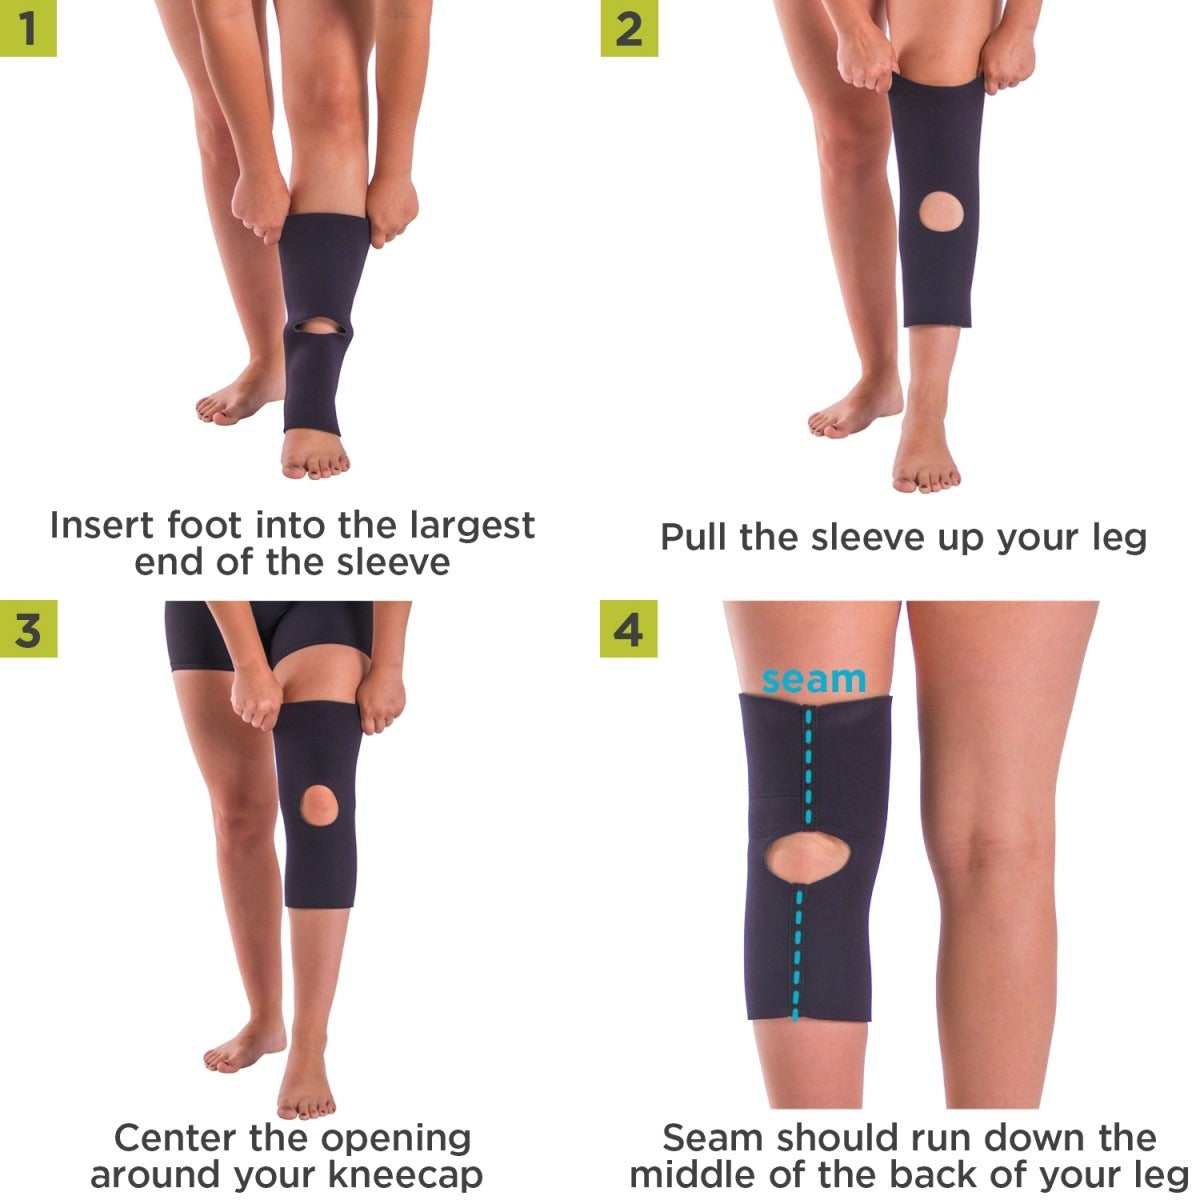 To apply this knee sleeve follow these easy 4-step instructions